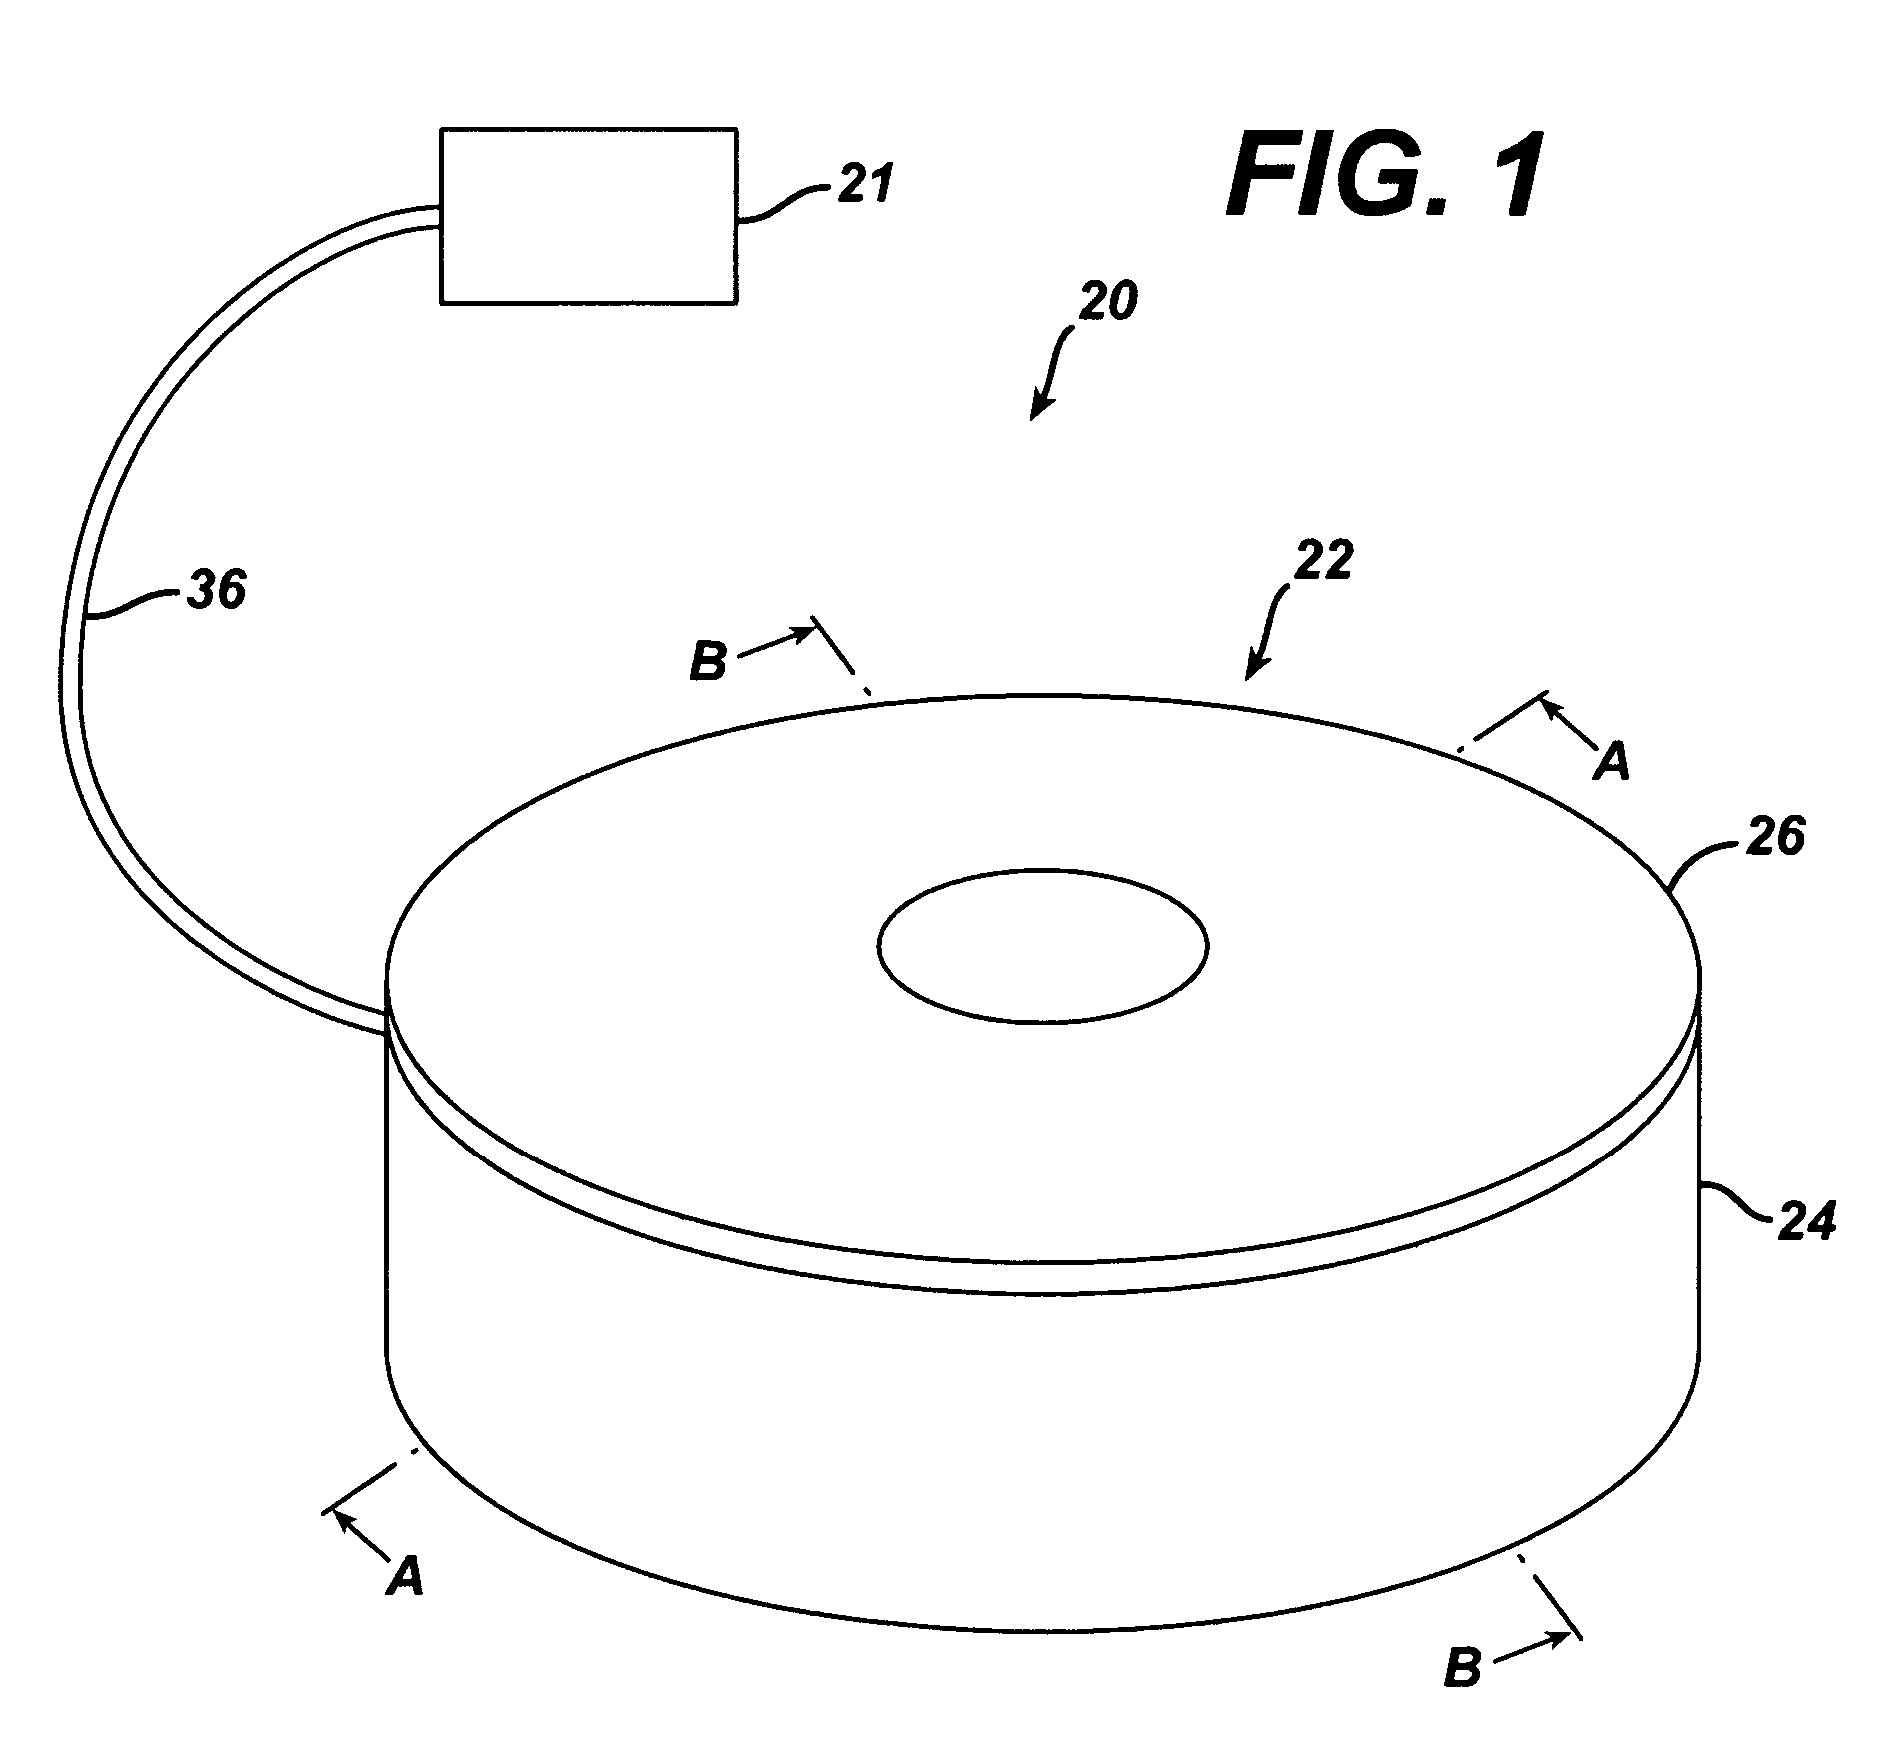 Piezo electrically driven bellows infuser for hydraulically controlling an adjustable gastric band